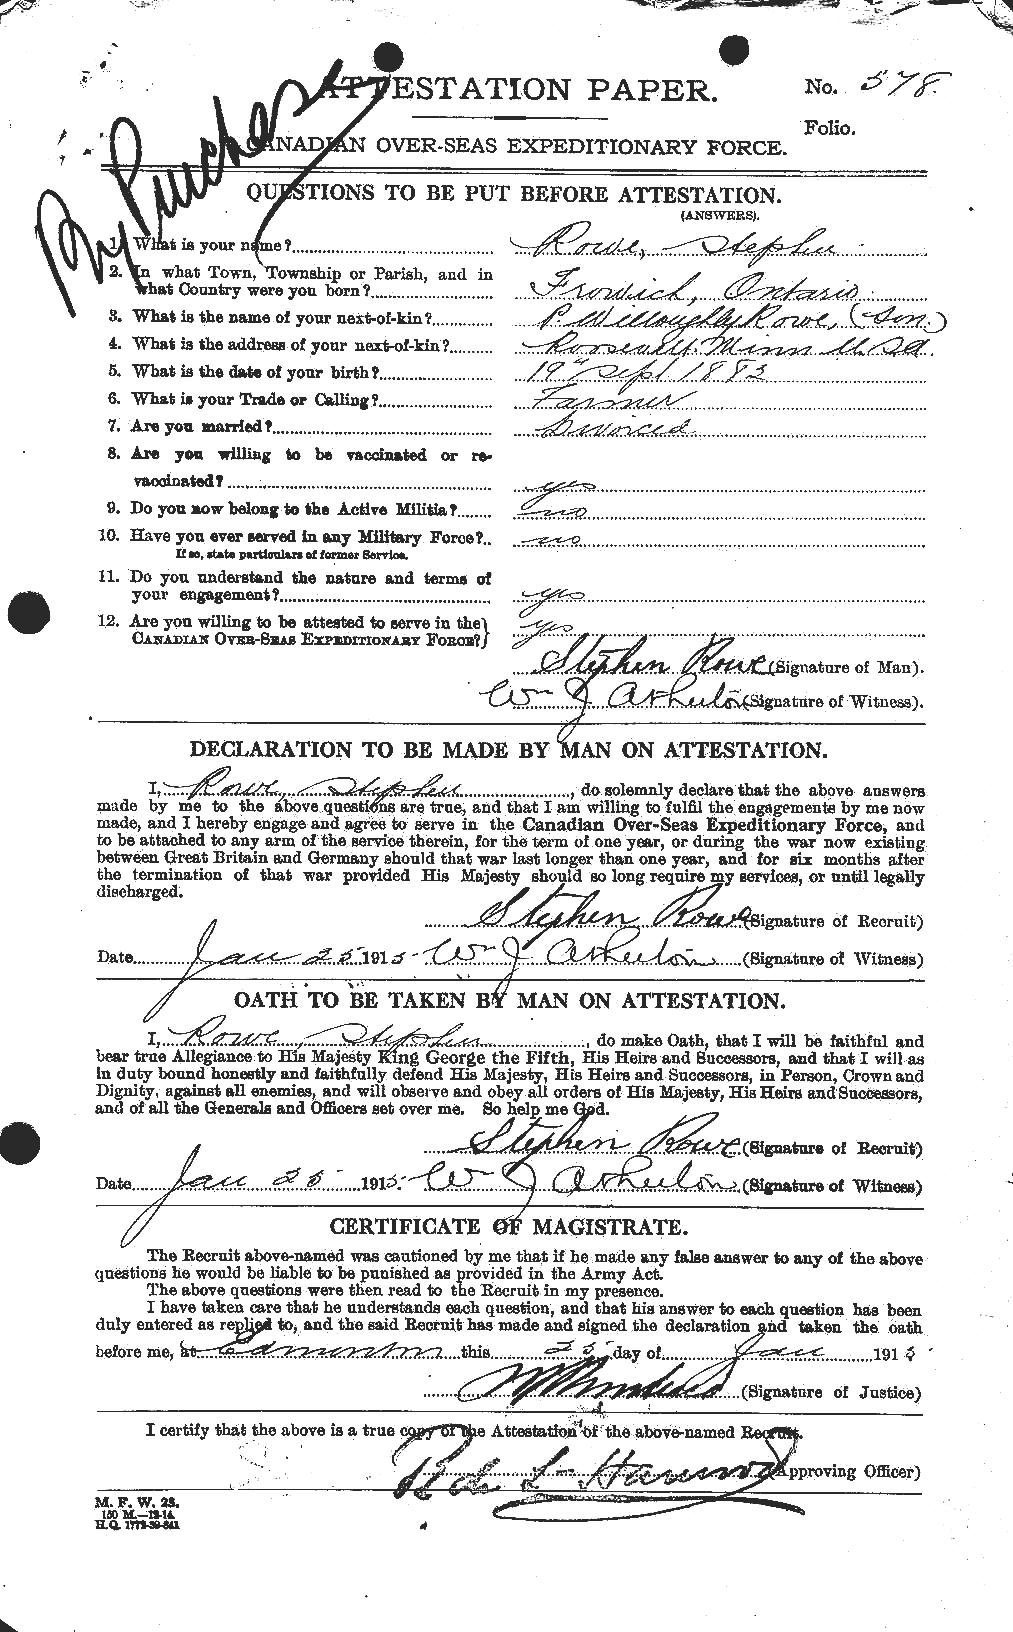 Personnel Records of the First World War - CEF 615993a